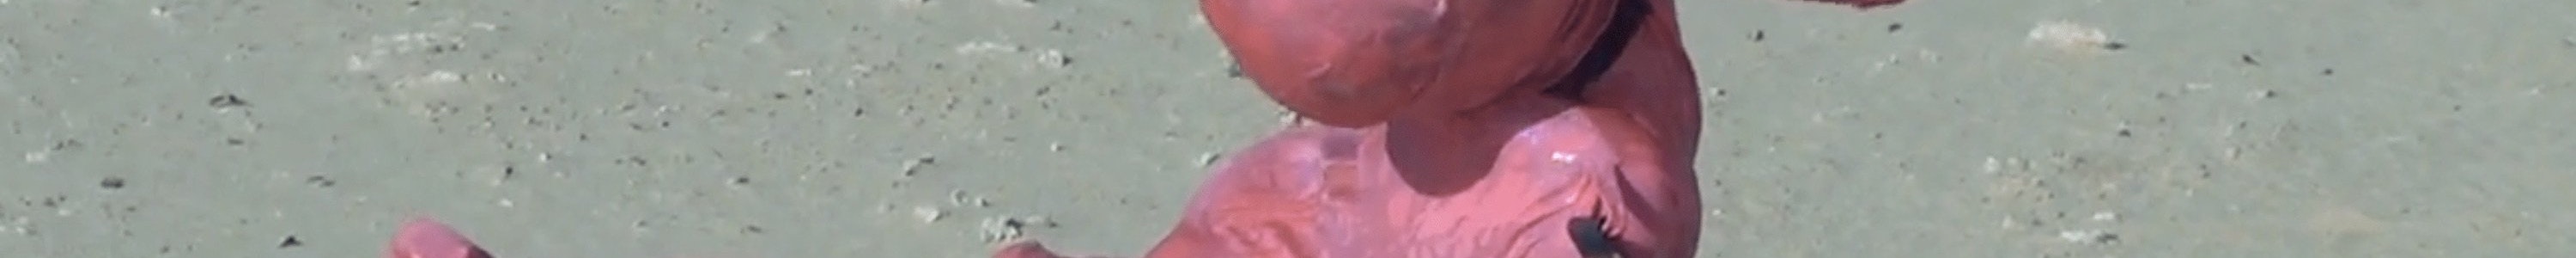 A figure dressed in a full-body holographic pink morph suit crawls along the sand on a sunny beach. They are potentially being walked like a dog or pulled along. This is shown by a black piece of fabric around their neck leading outside of the image to something or someone we can not see.